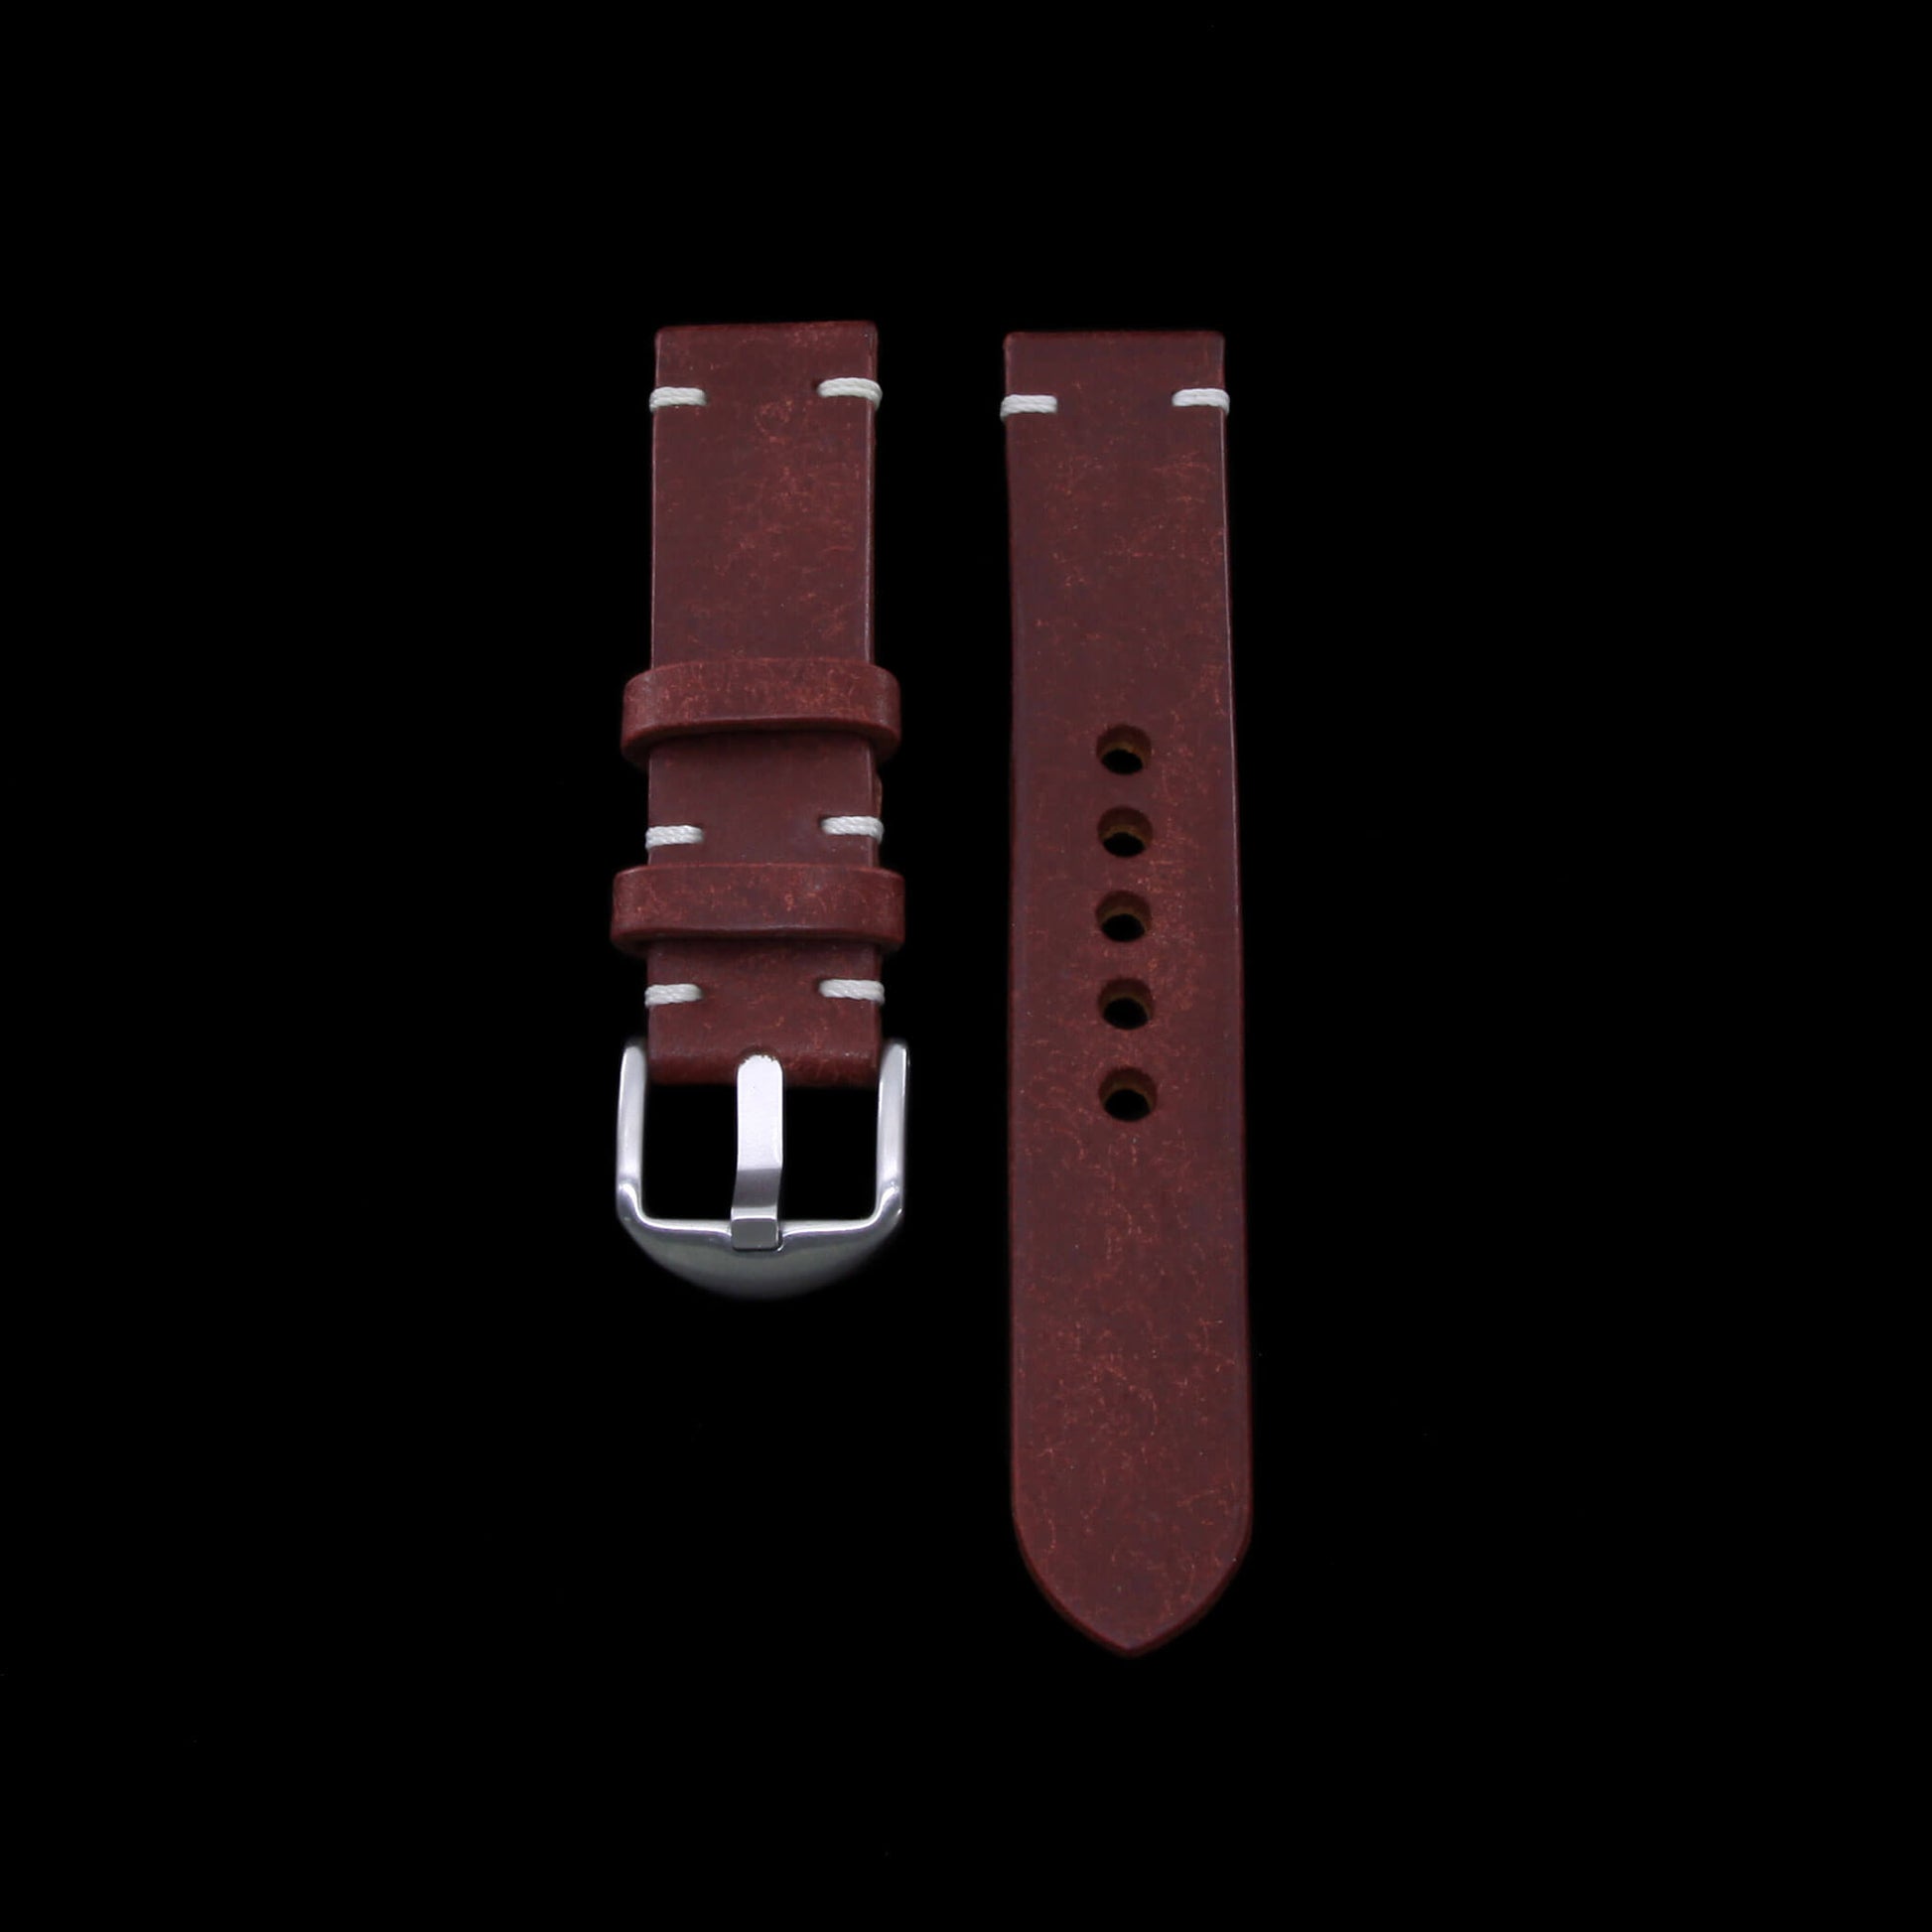 2nd View of 2-Piece Minimalist Leather Watch Strap, made with Pueblo Cocinella Italian veg-tanned leather by Cozy Handmade